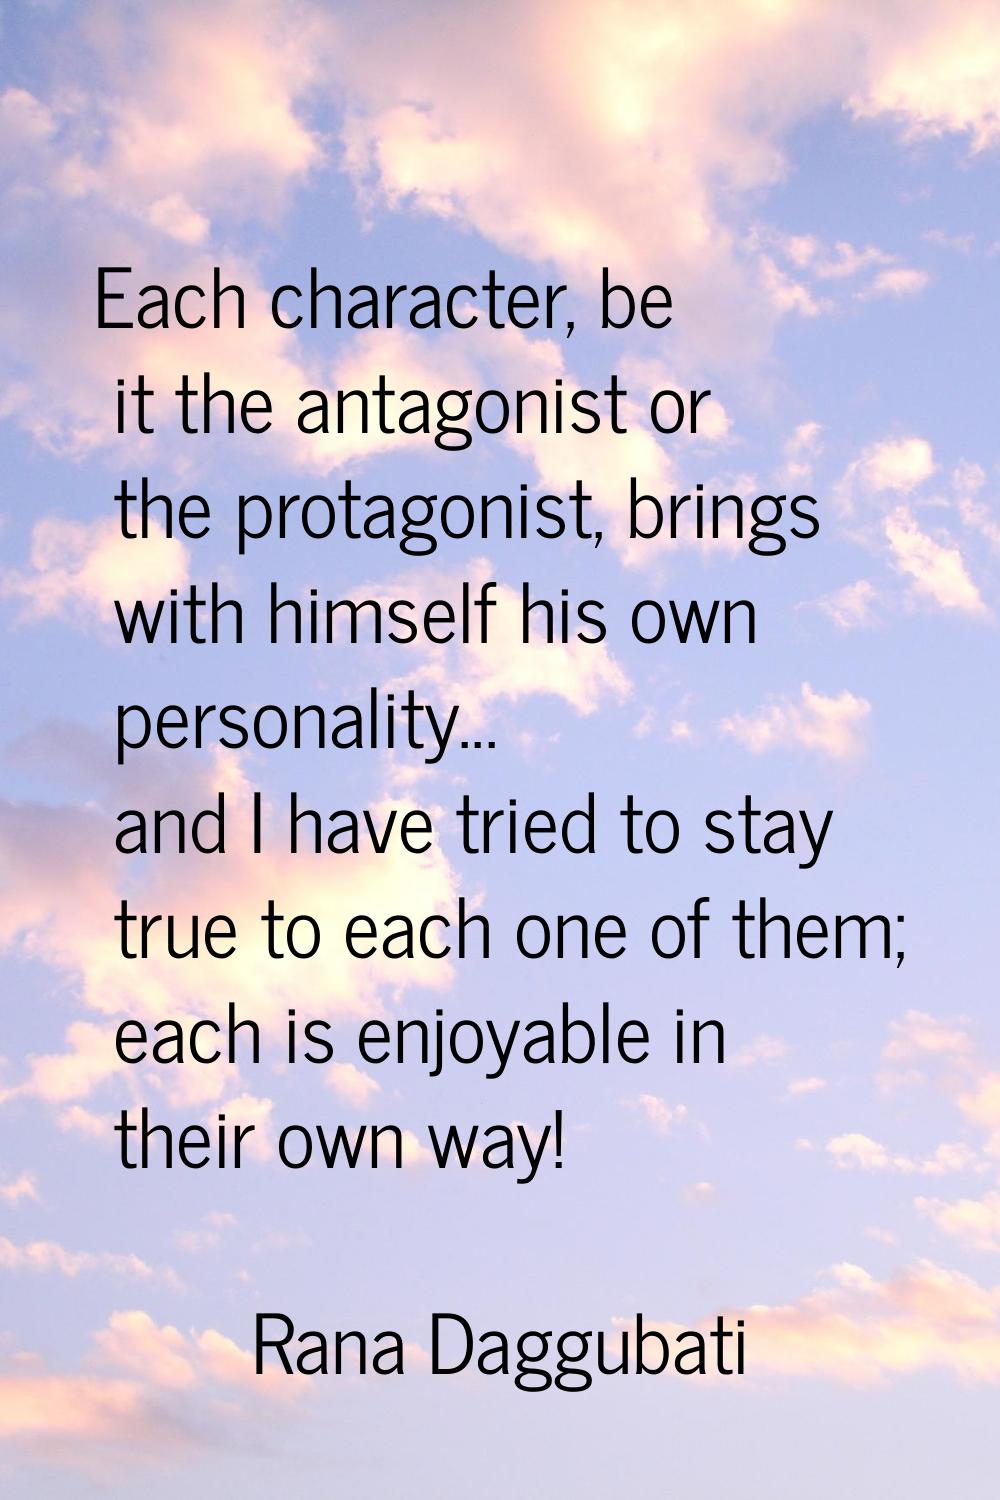 Each character, be it the antagonist or the protagonist, brings with himself his own personality...